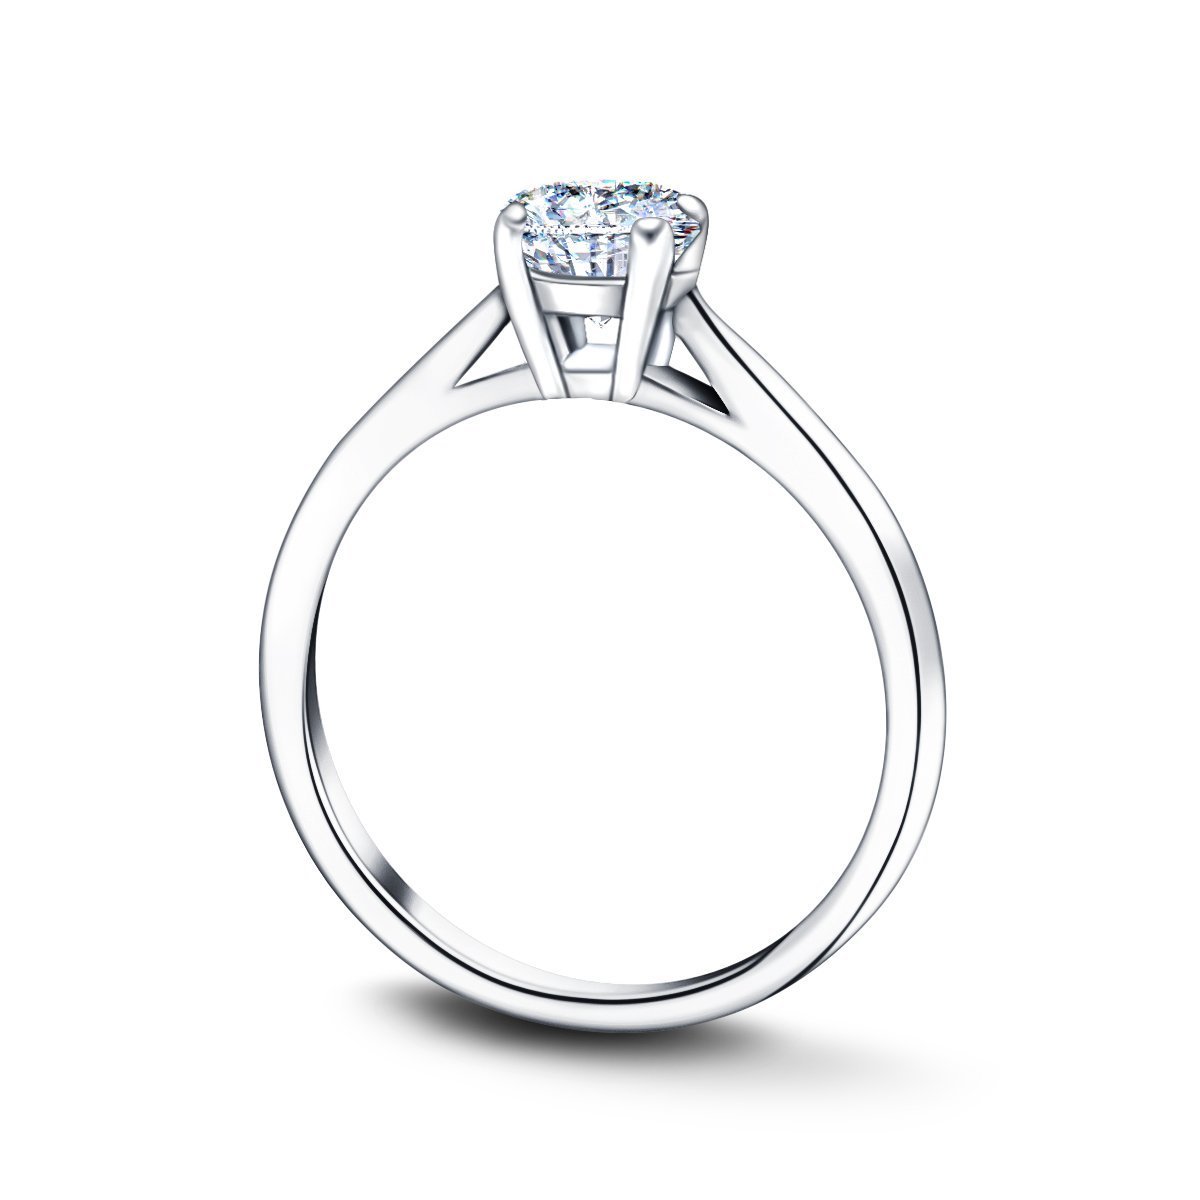 Certified Solitaire Diamond Engagement Ring 0.90ct G/SI Quality Platinum - All Diamond